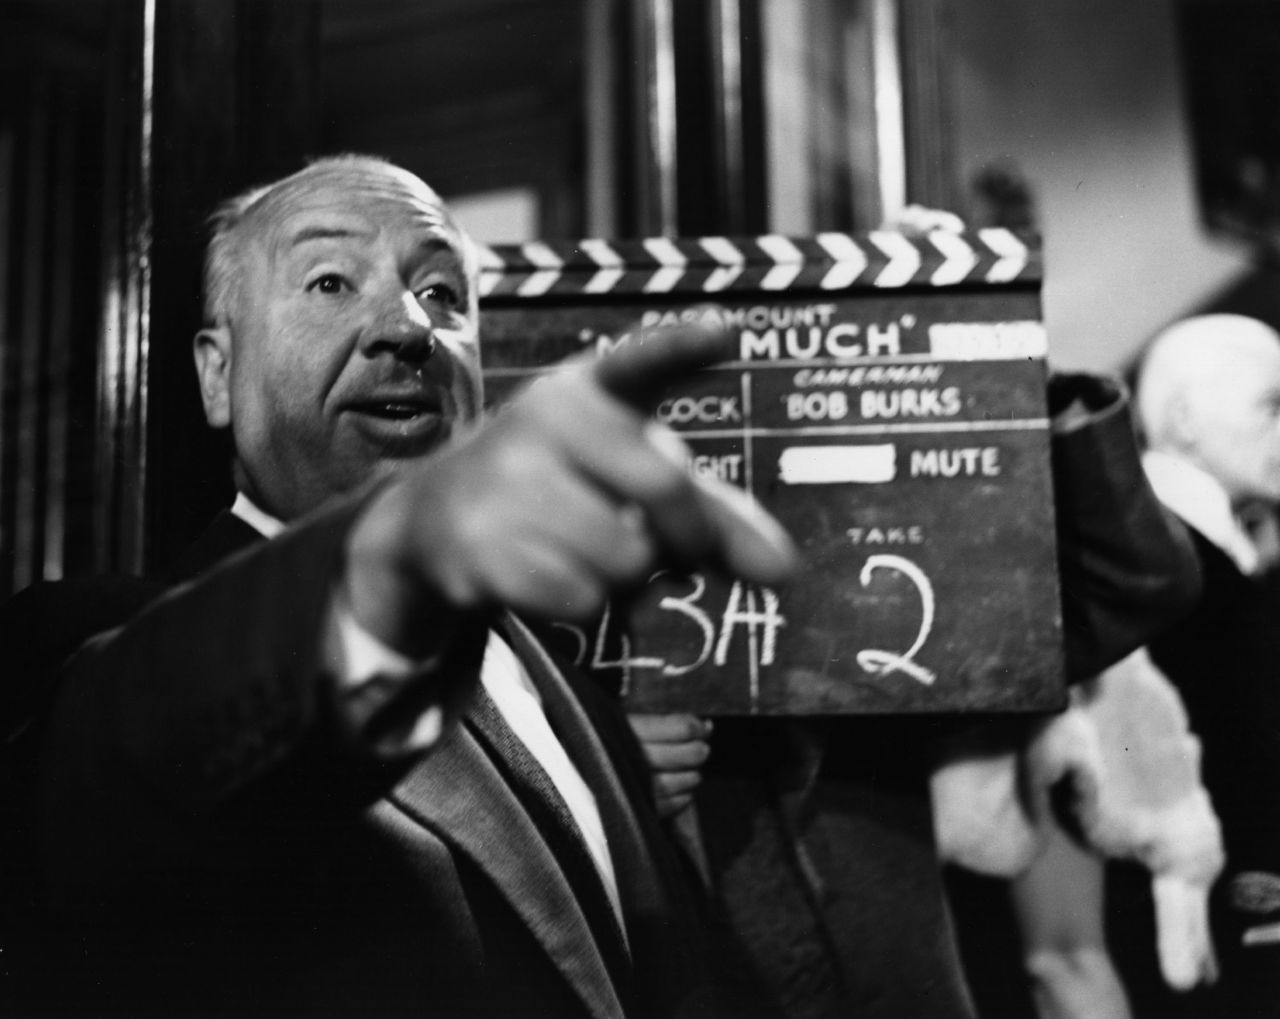 Even after his move stateside, Hitchcock returned to his roots on several occasions. In 1956, he came back to London to remake his 1934 film "The Man Who Knew Too Much." The climax of both movies takes place at the Royal Albert Hall.